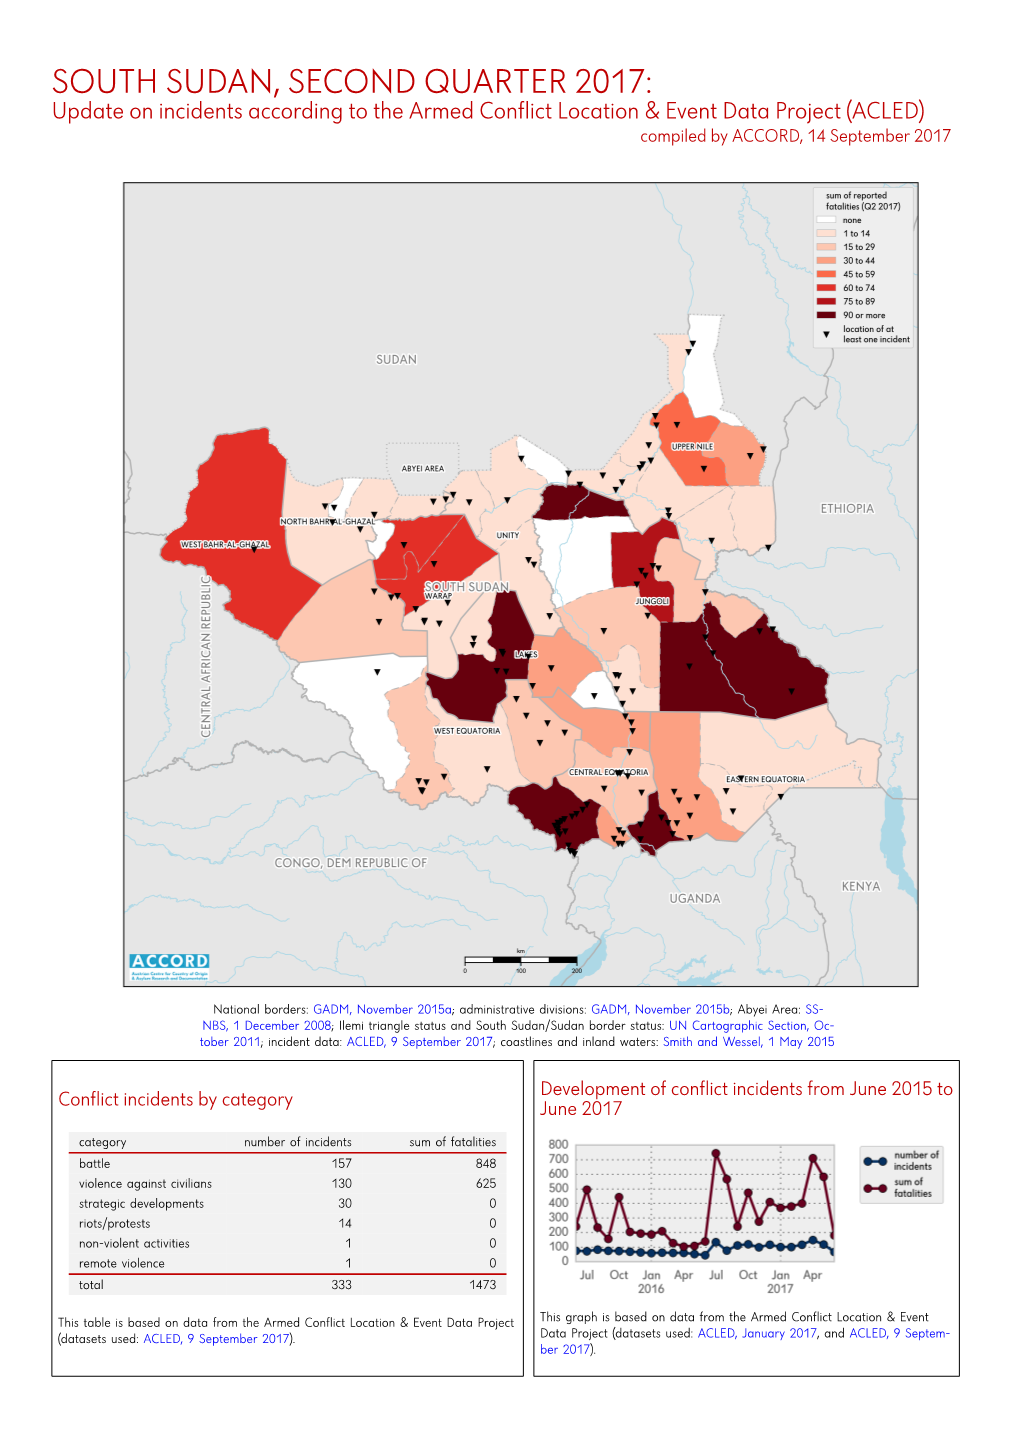 South Sudan, Second Quarter 2017: Update on Incidents According to the Armed Conflict Location & Event Data Project (ACLED)